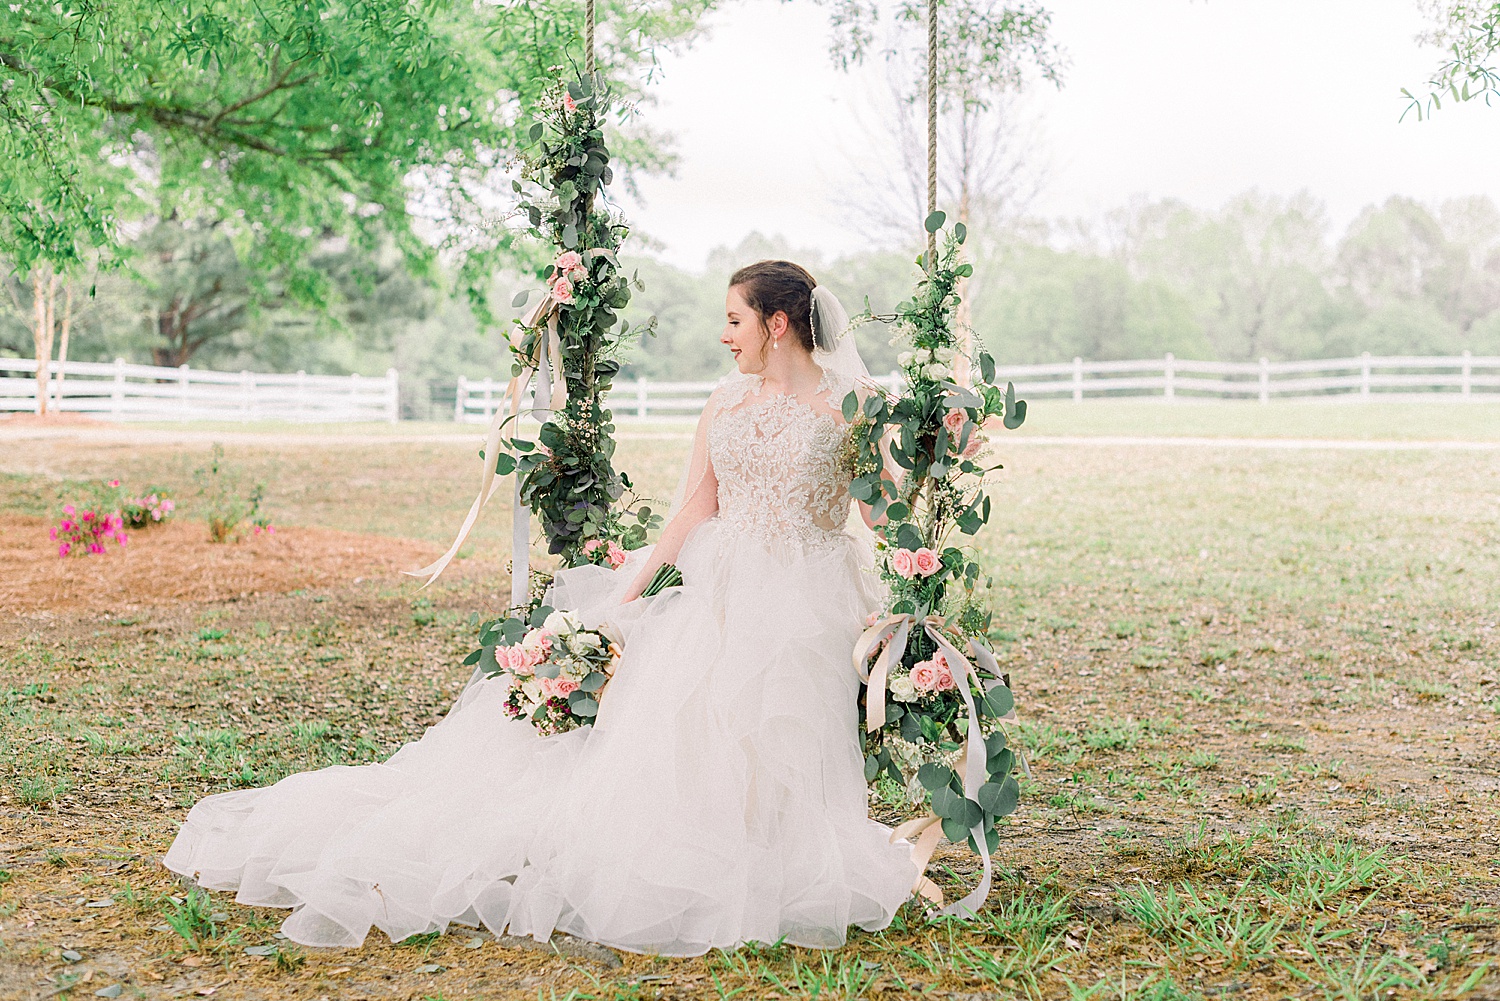 bride sits on decorated swing hanging from tree outside the Tangarray Wedding venue